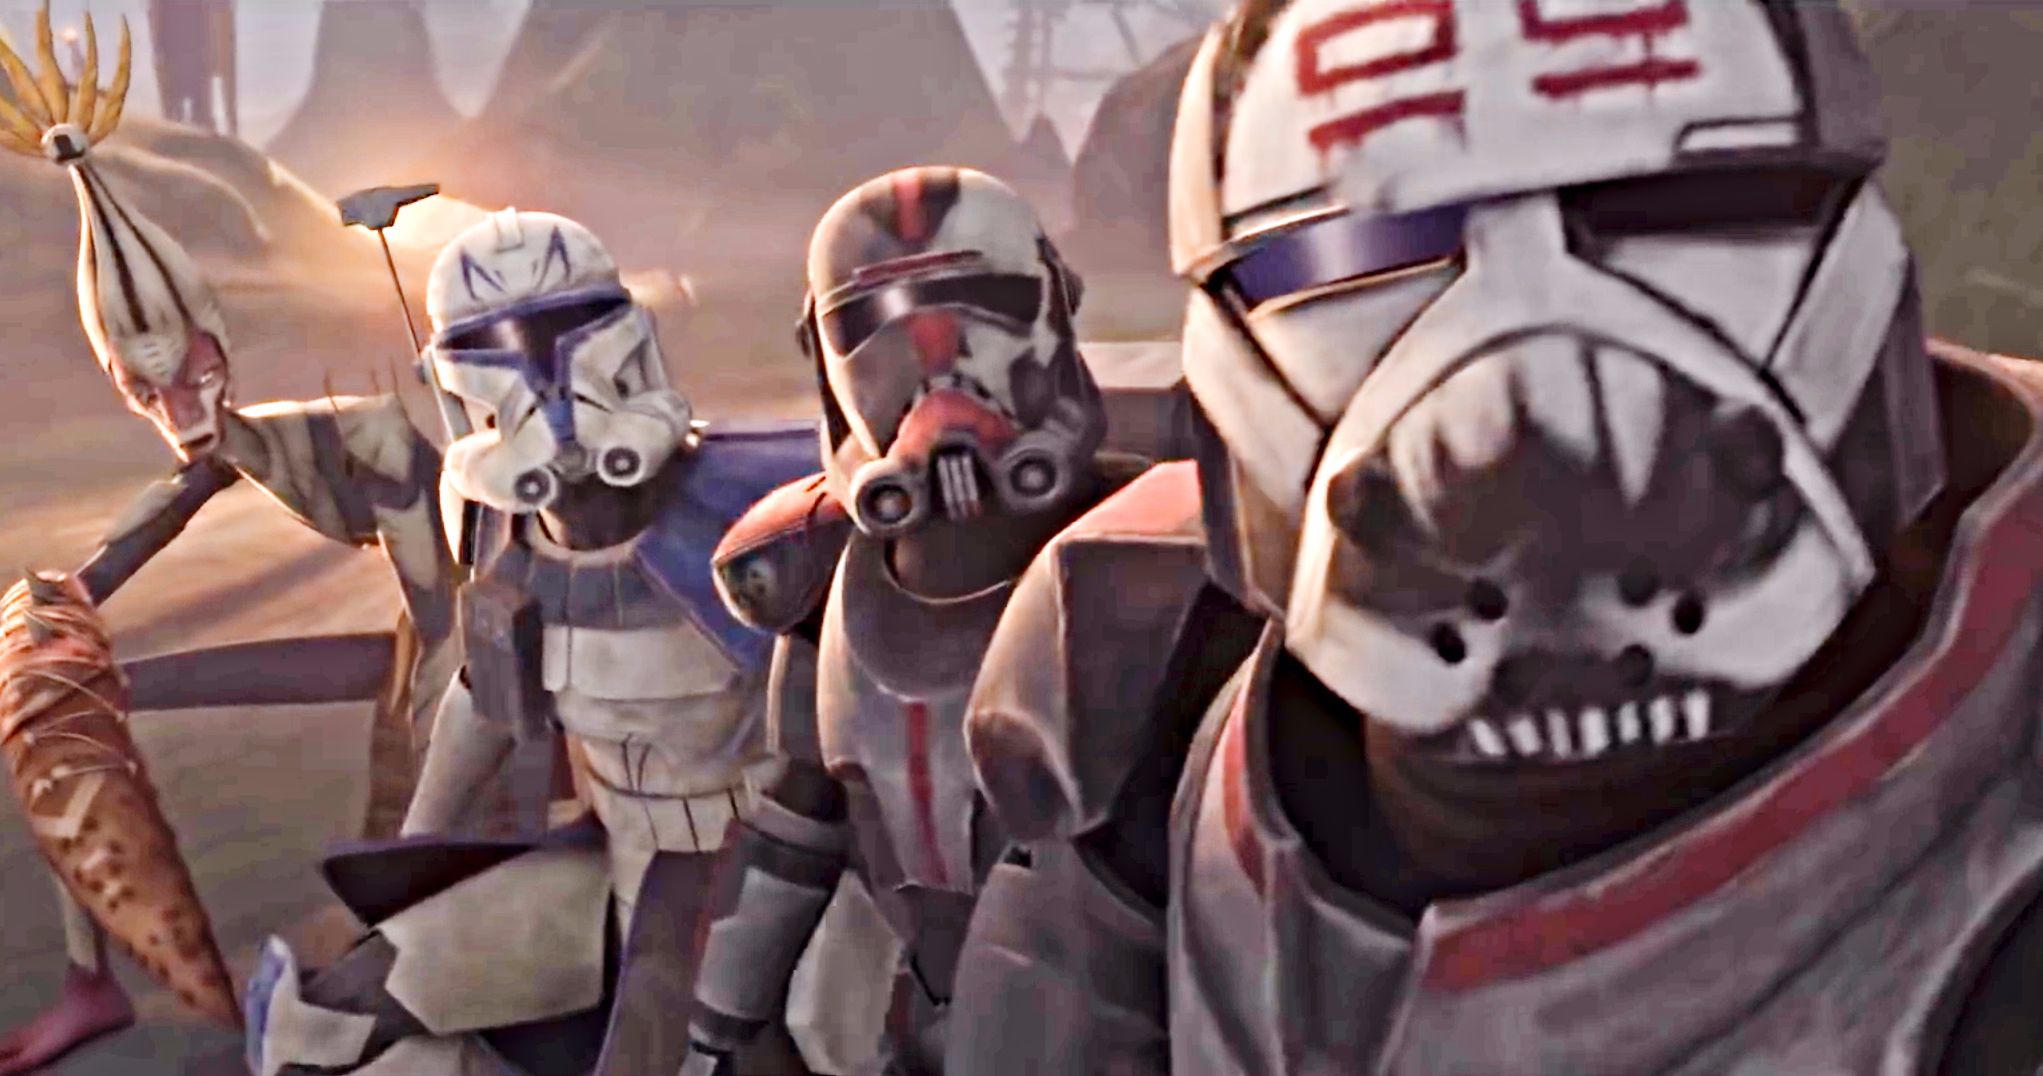 New The Clone Wars Season 7 Trailer Introduces the Bad Batch: Clone Force 99